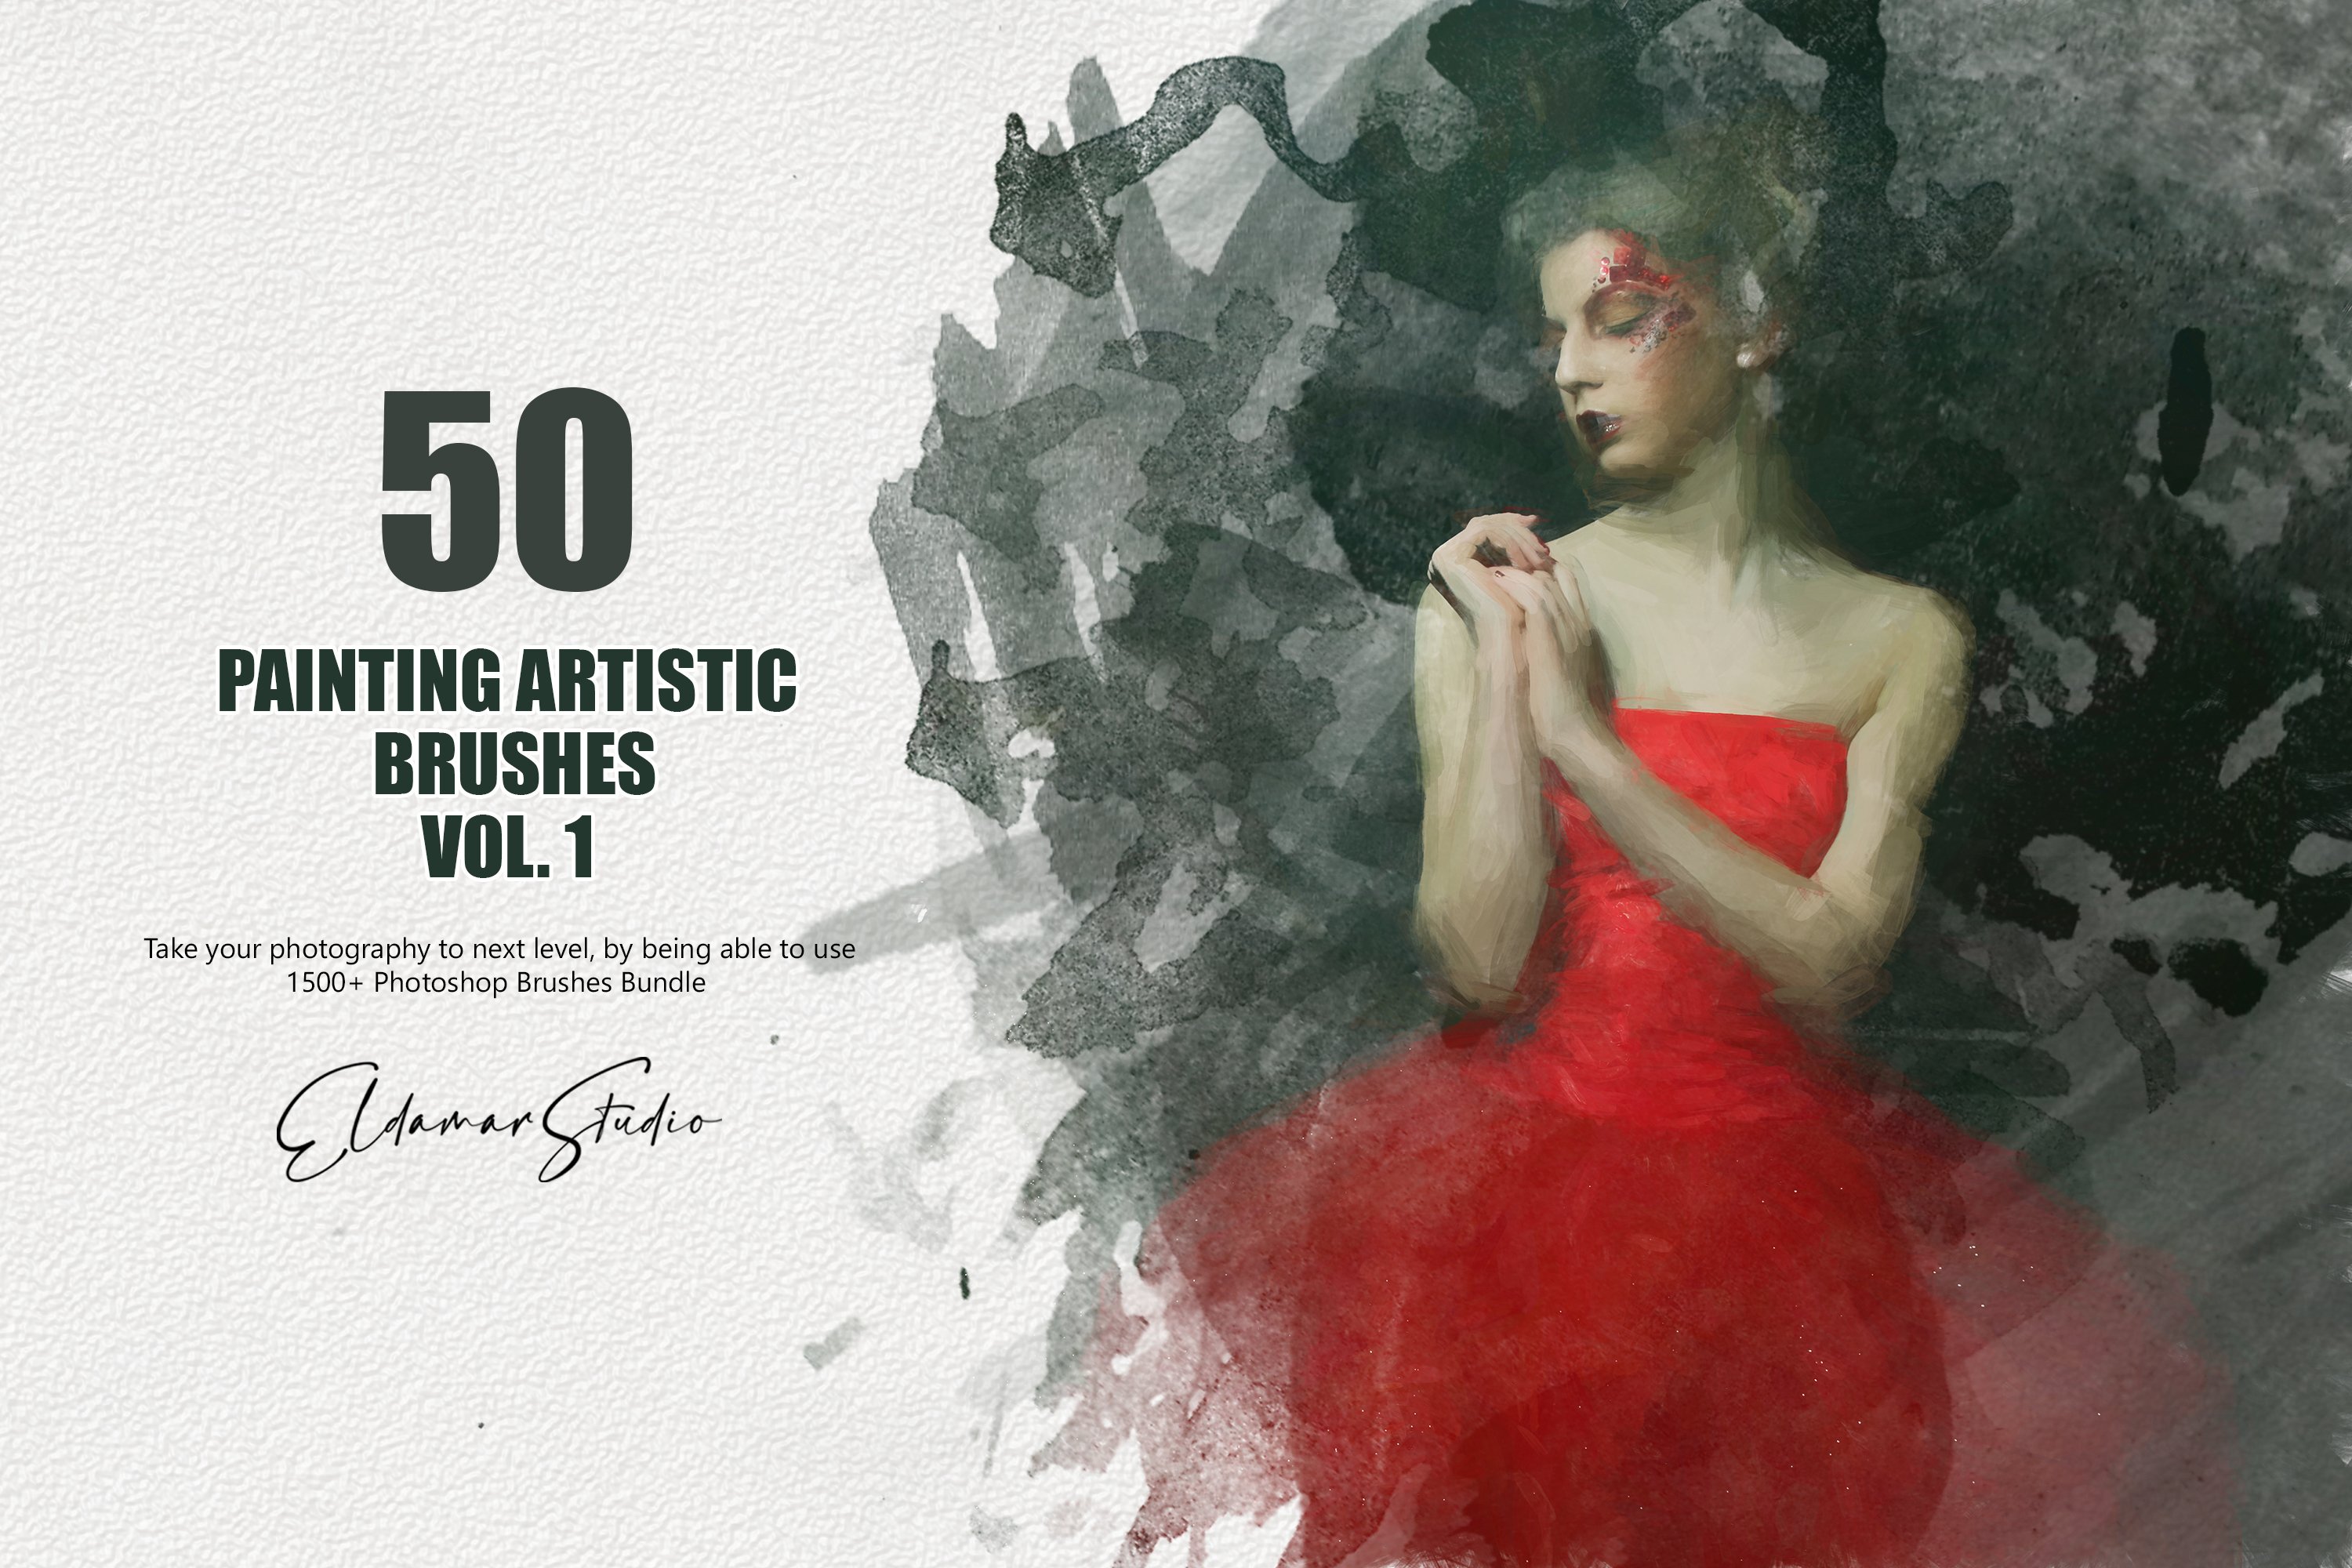 50 Painting Artistic Brushes - Vol.1cover image.